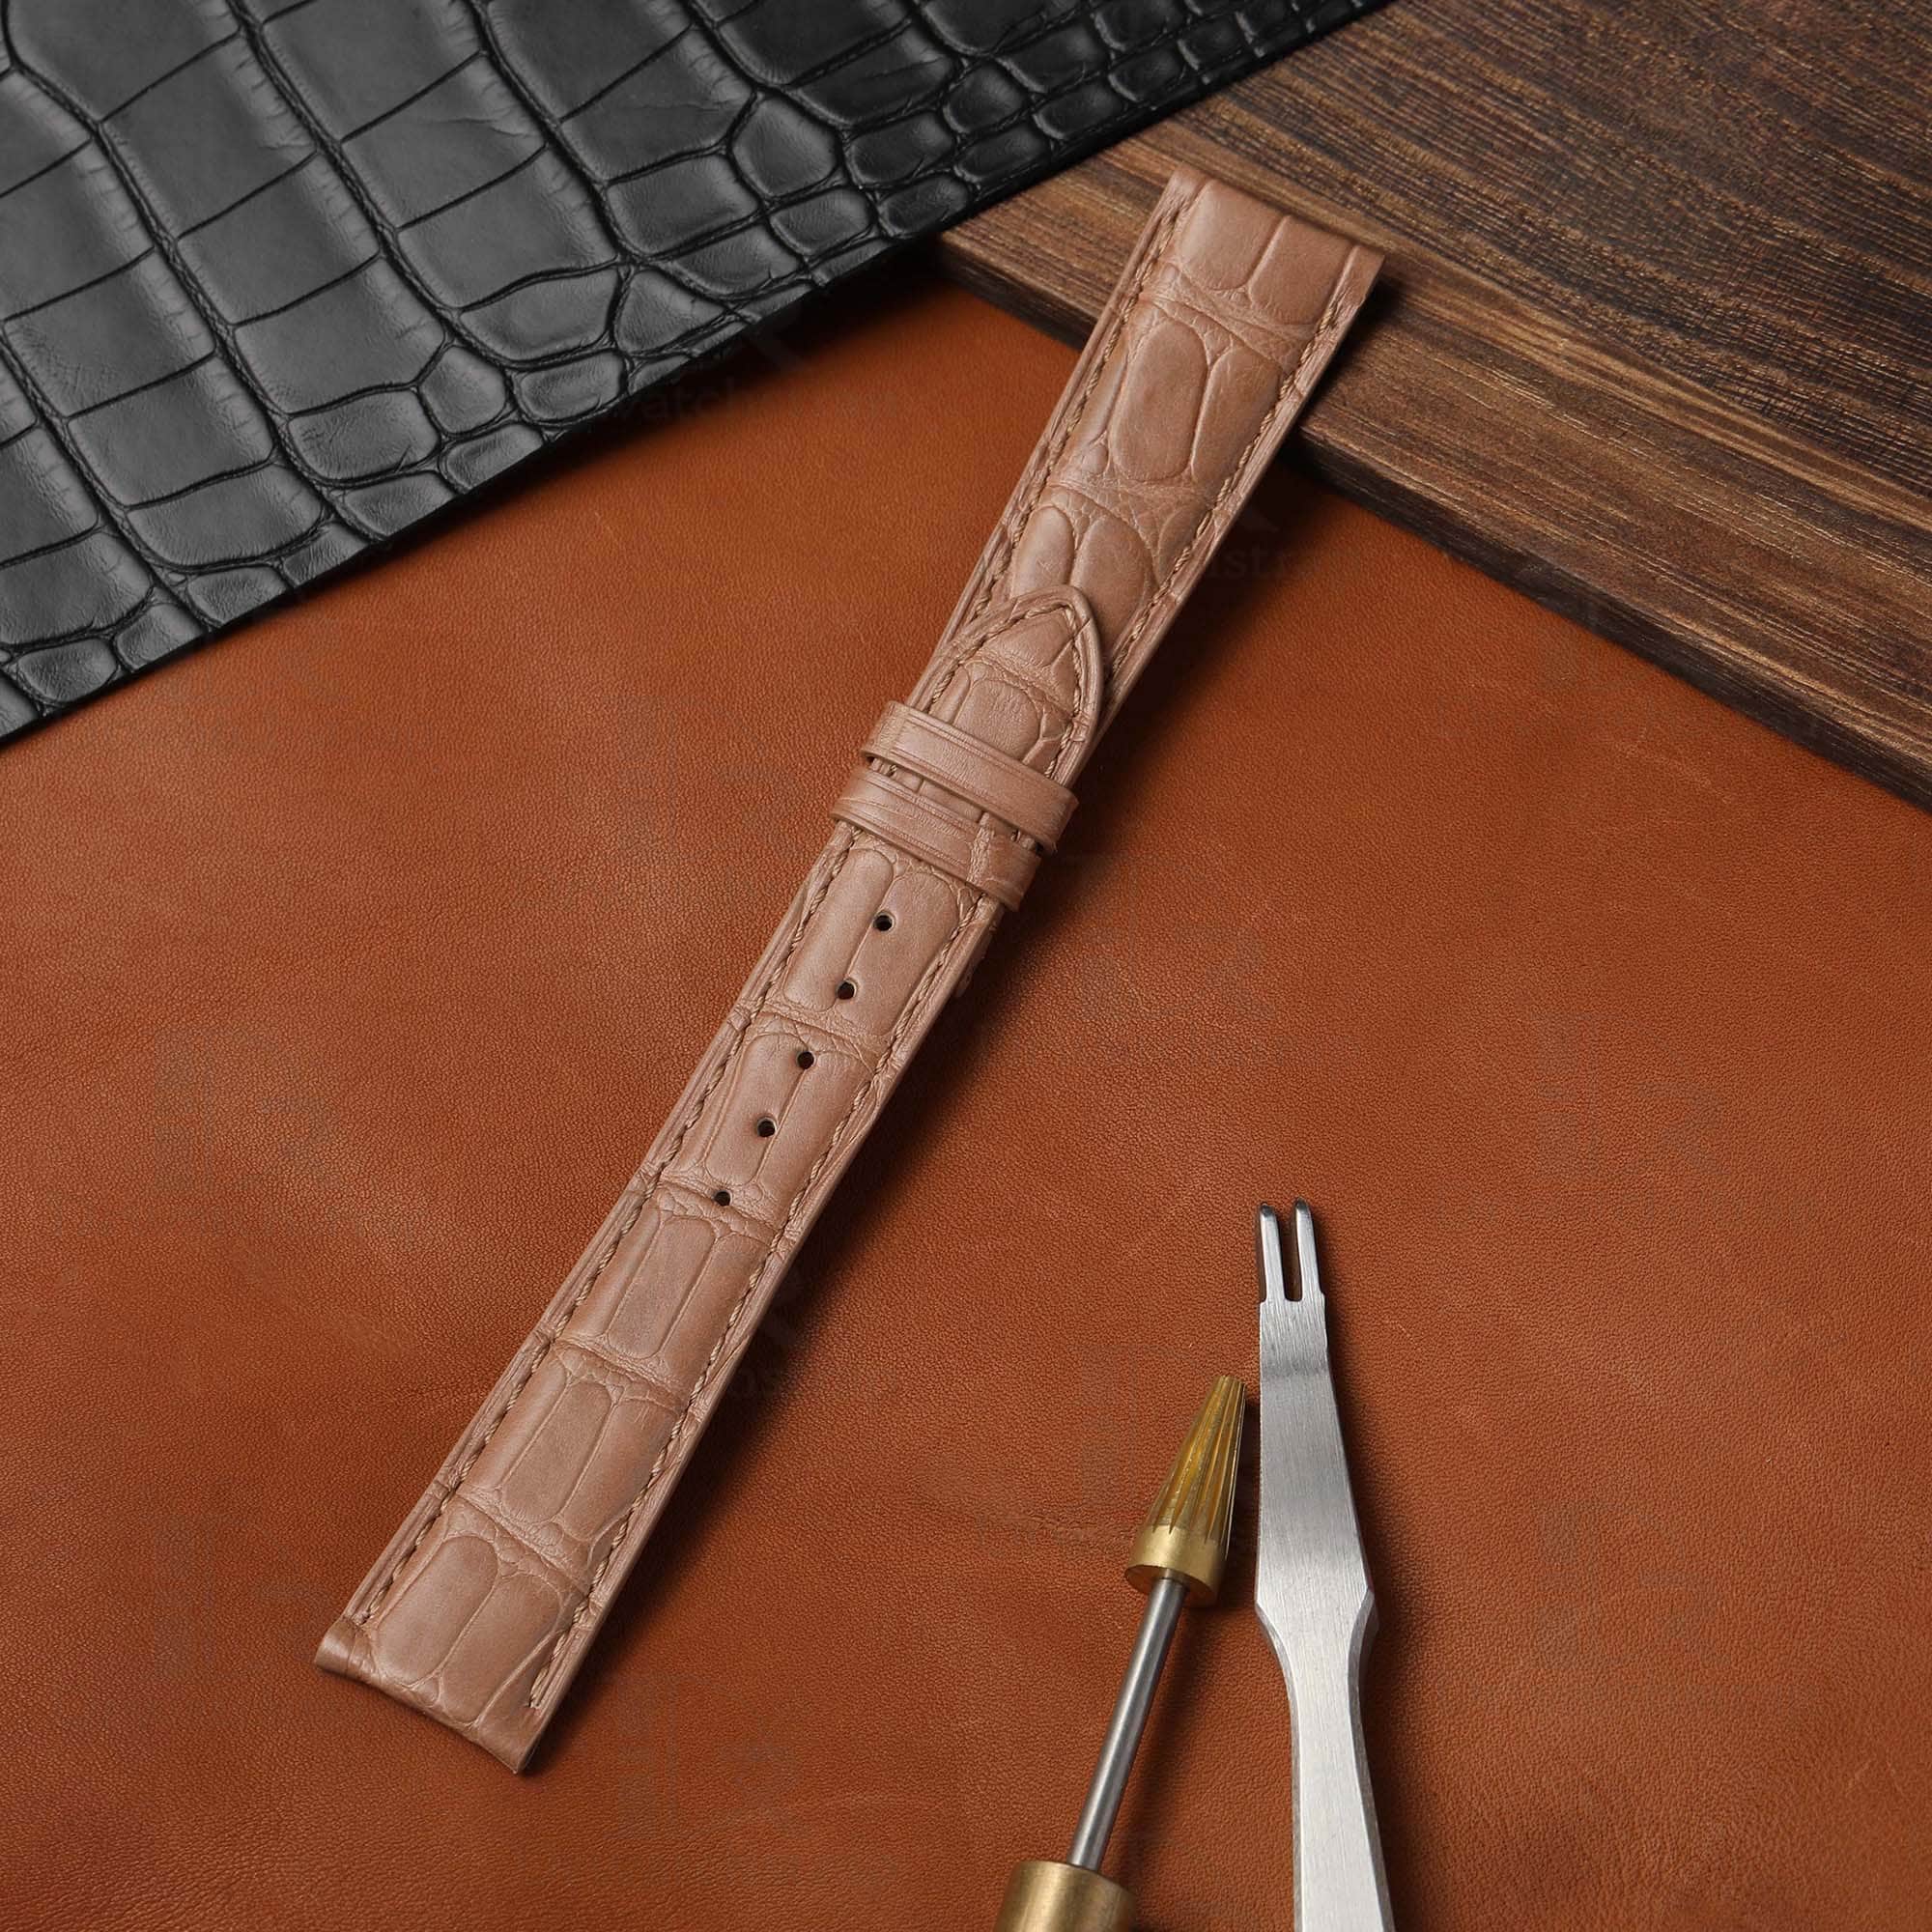 Soft and comfortable custom genuine alligator leather watch band